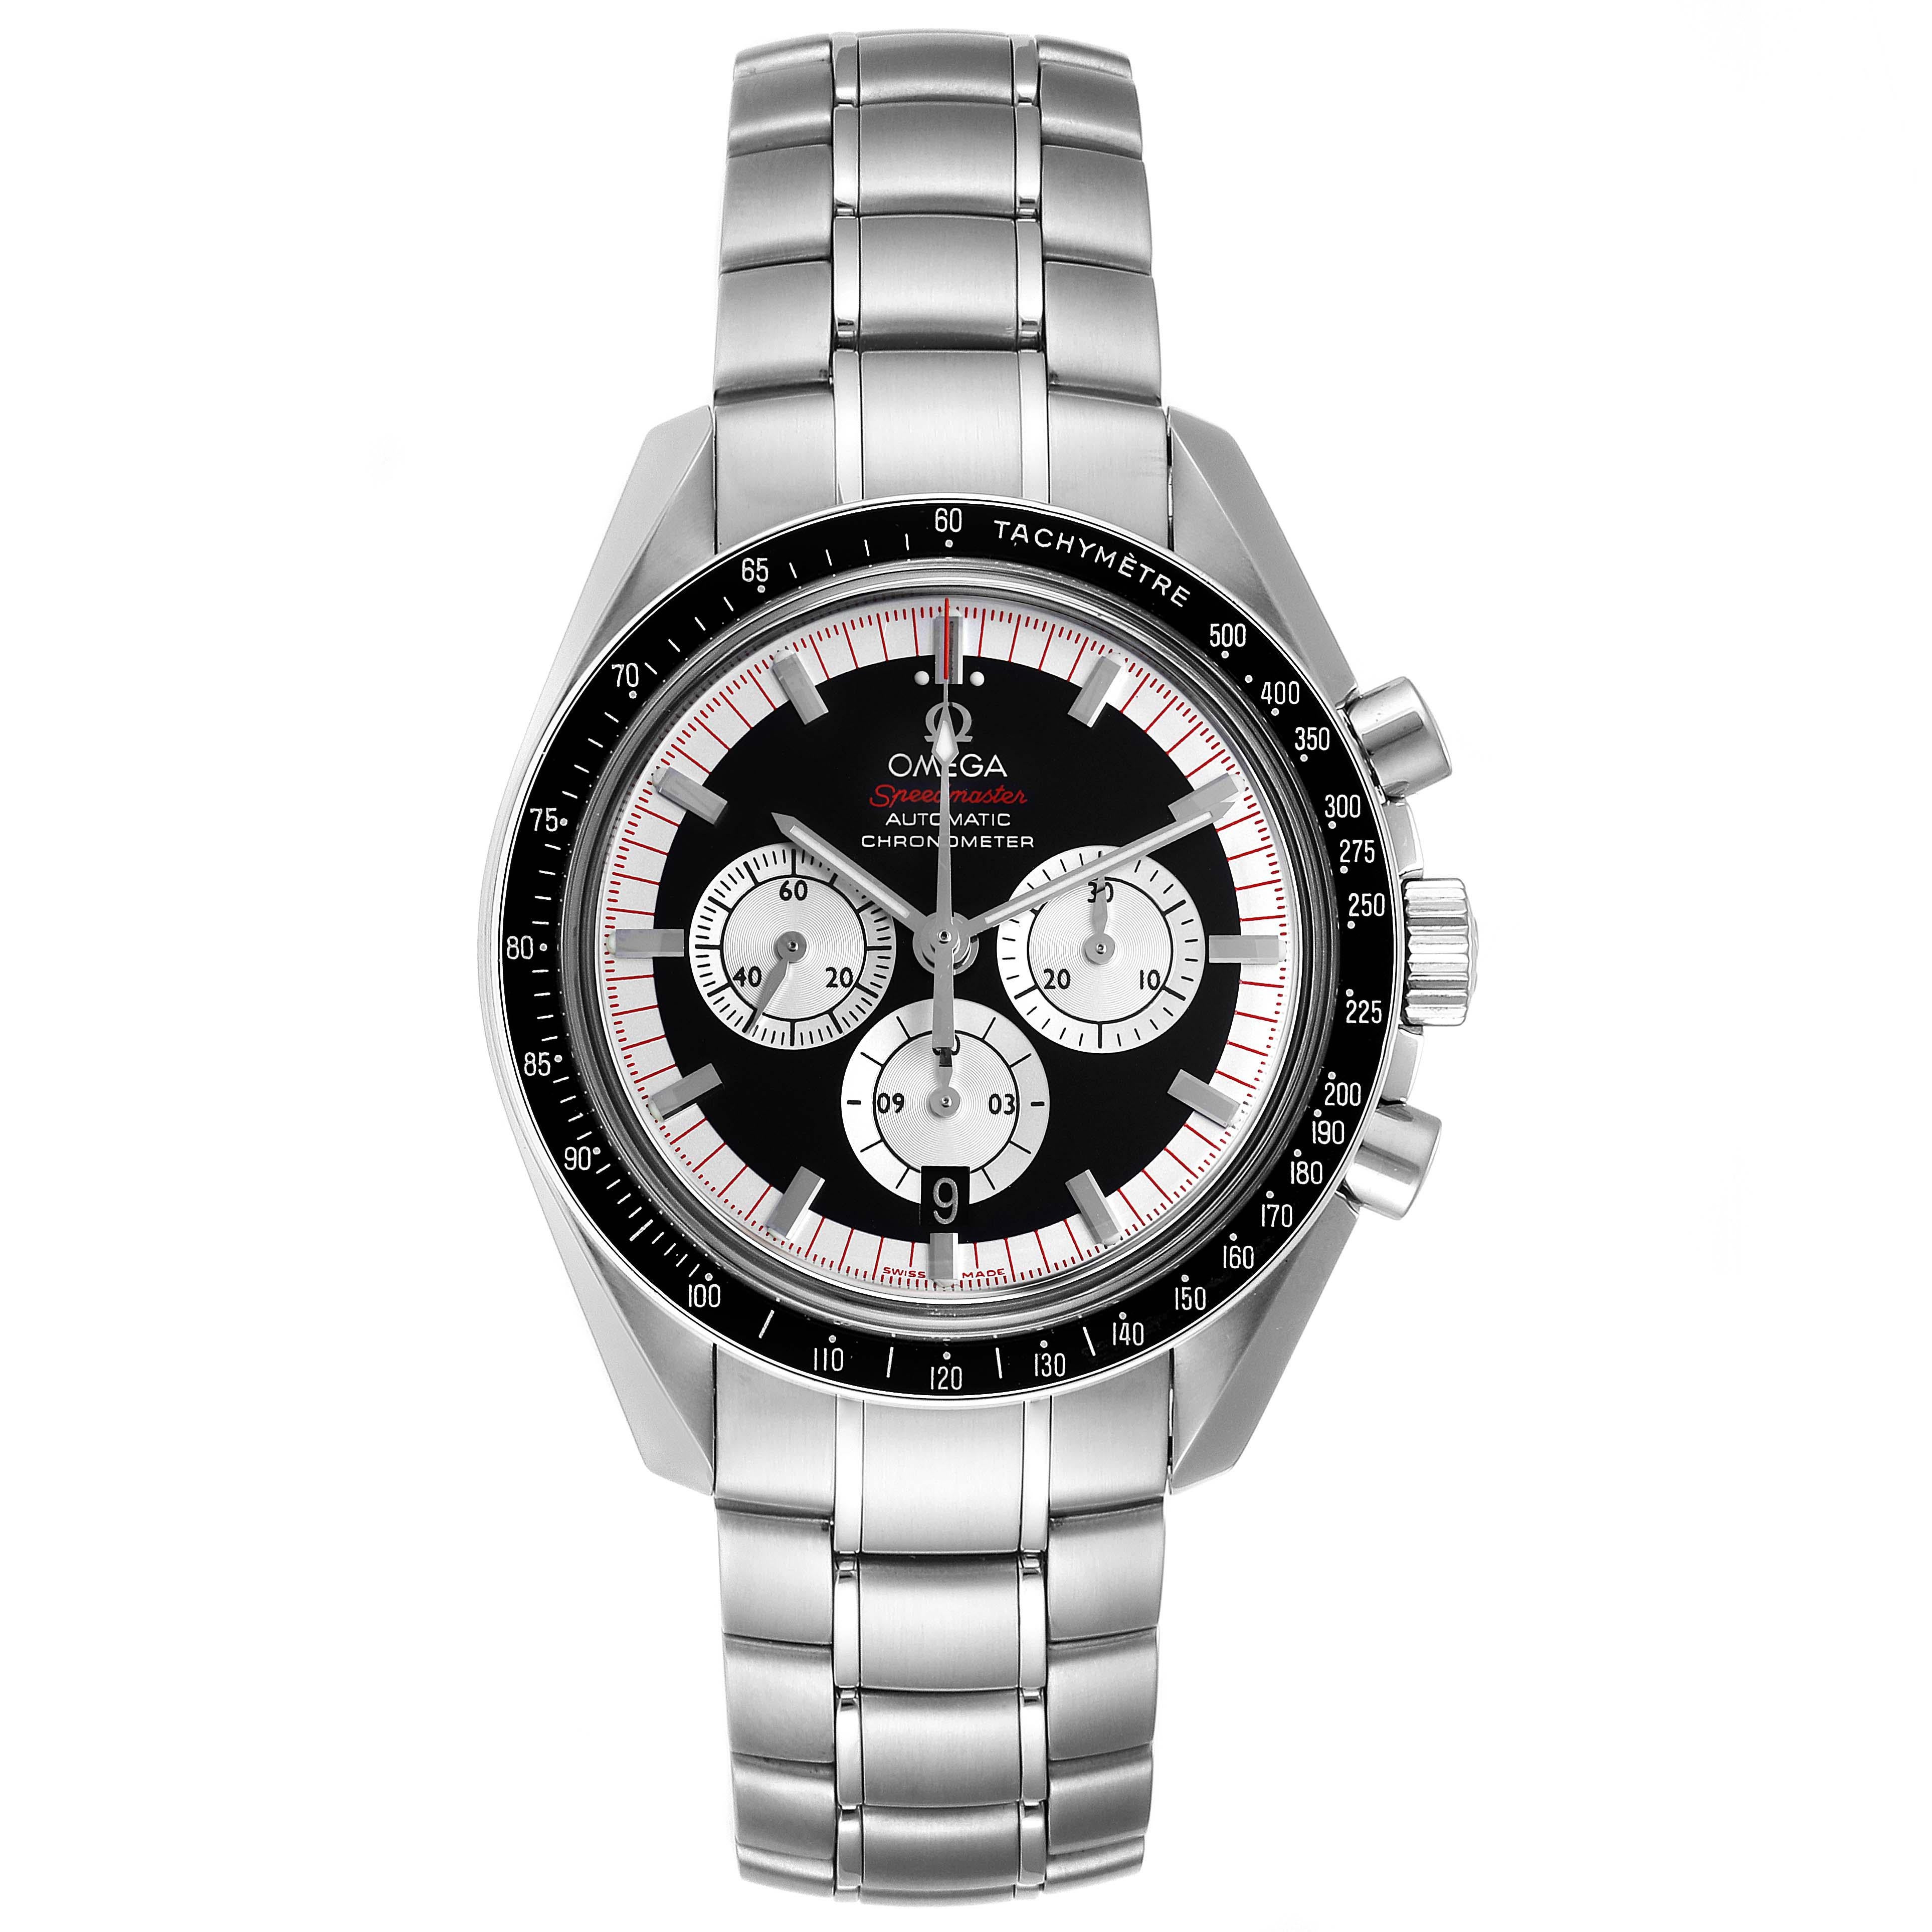 Omega Speedmaster Schumacher Legend LE Mens Watch 3507.51.00 Box Card. Automatic self-winding chronograph movement. Stainless steel round case 42.0 mm in diameter. Black ion-plated bezel with tachymetre function. Scratch-resistant sapphire crystal